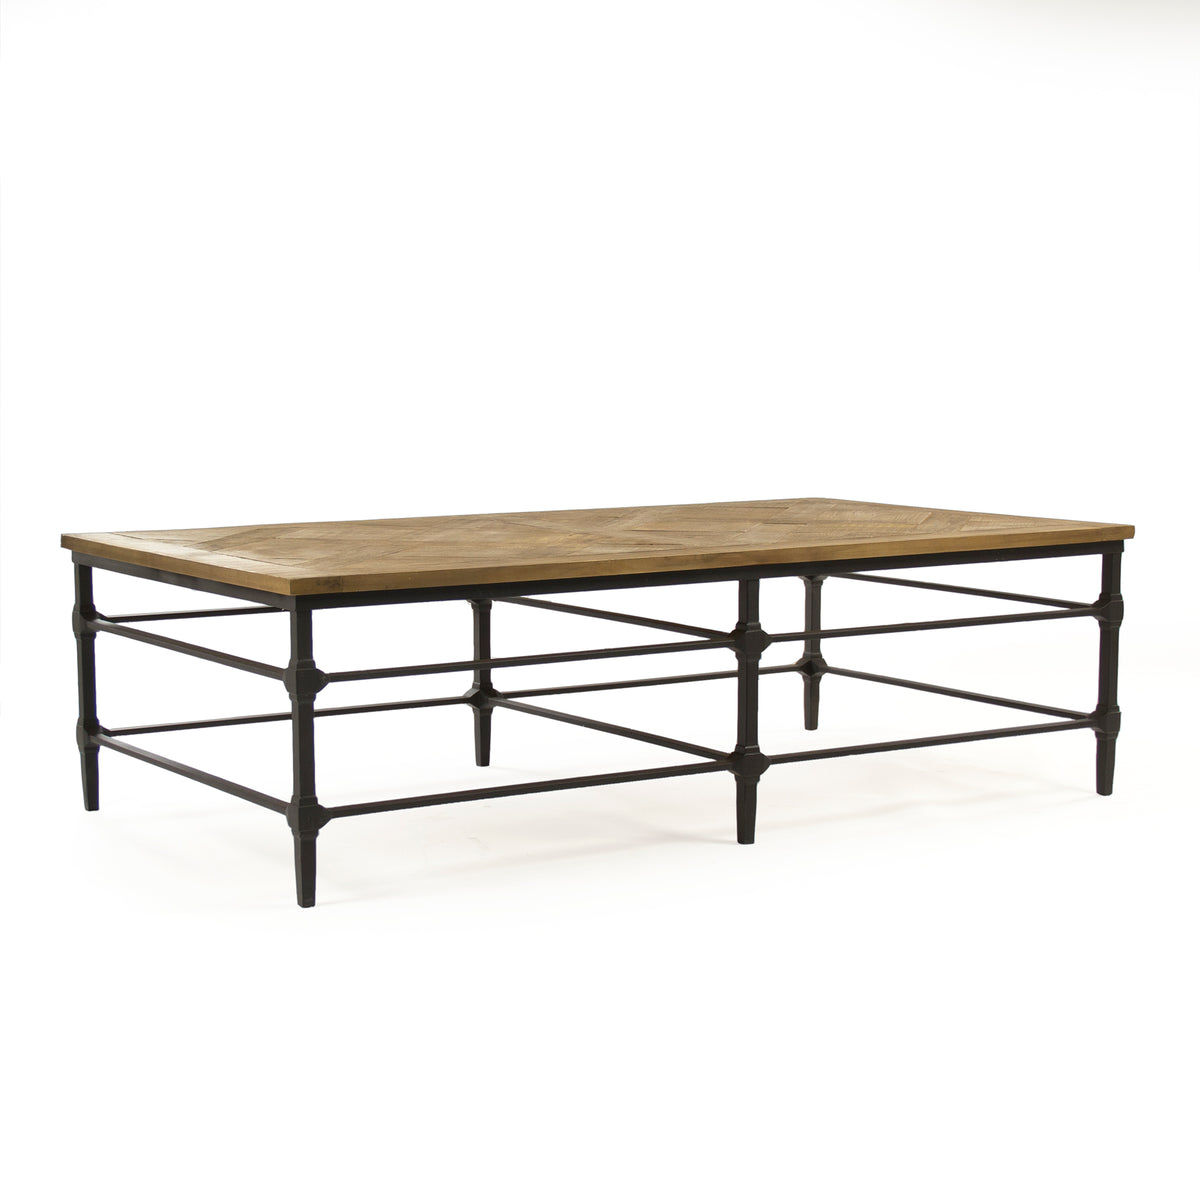 Aveline Coffee Table by Zentique